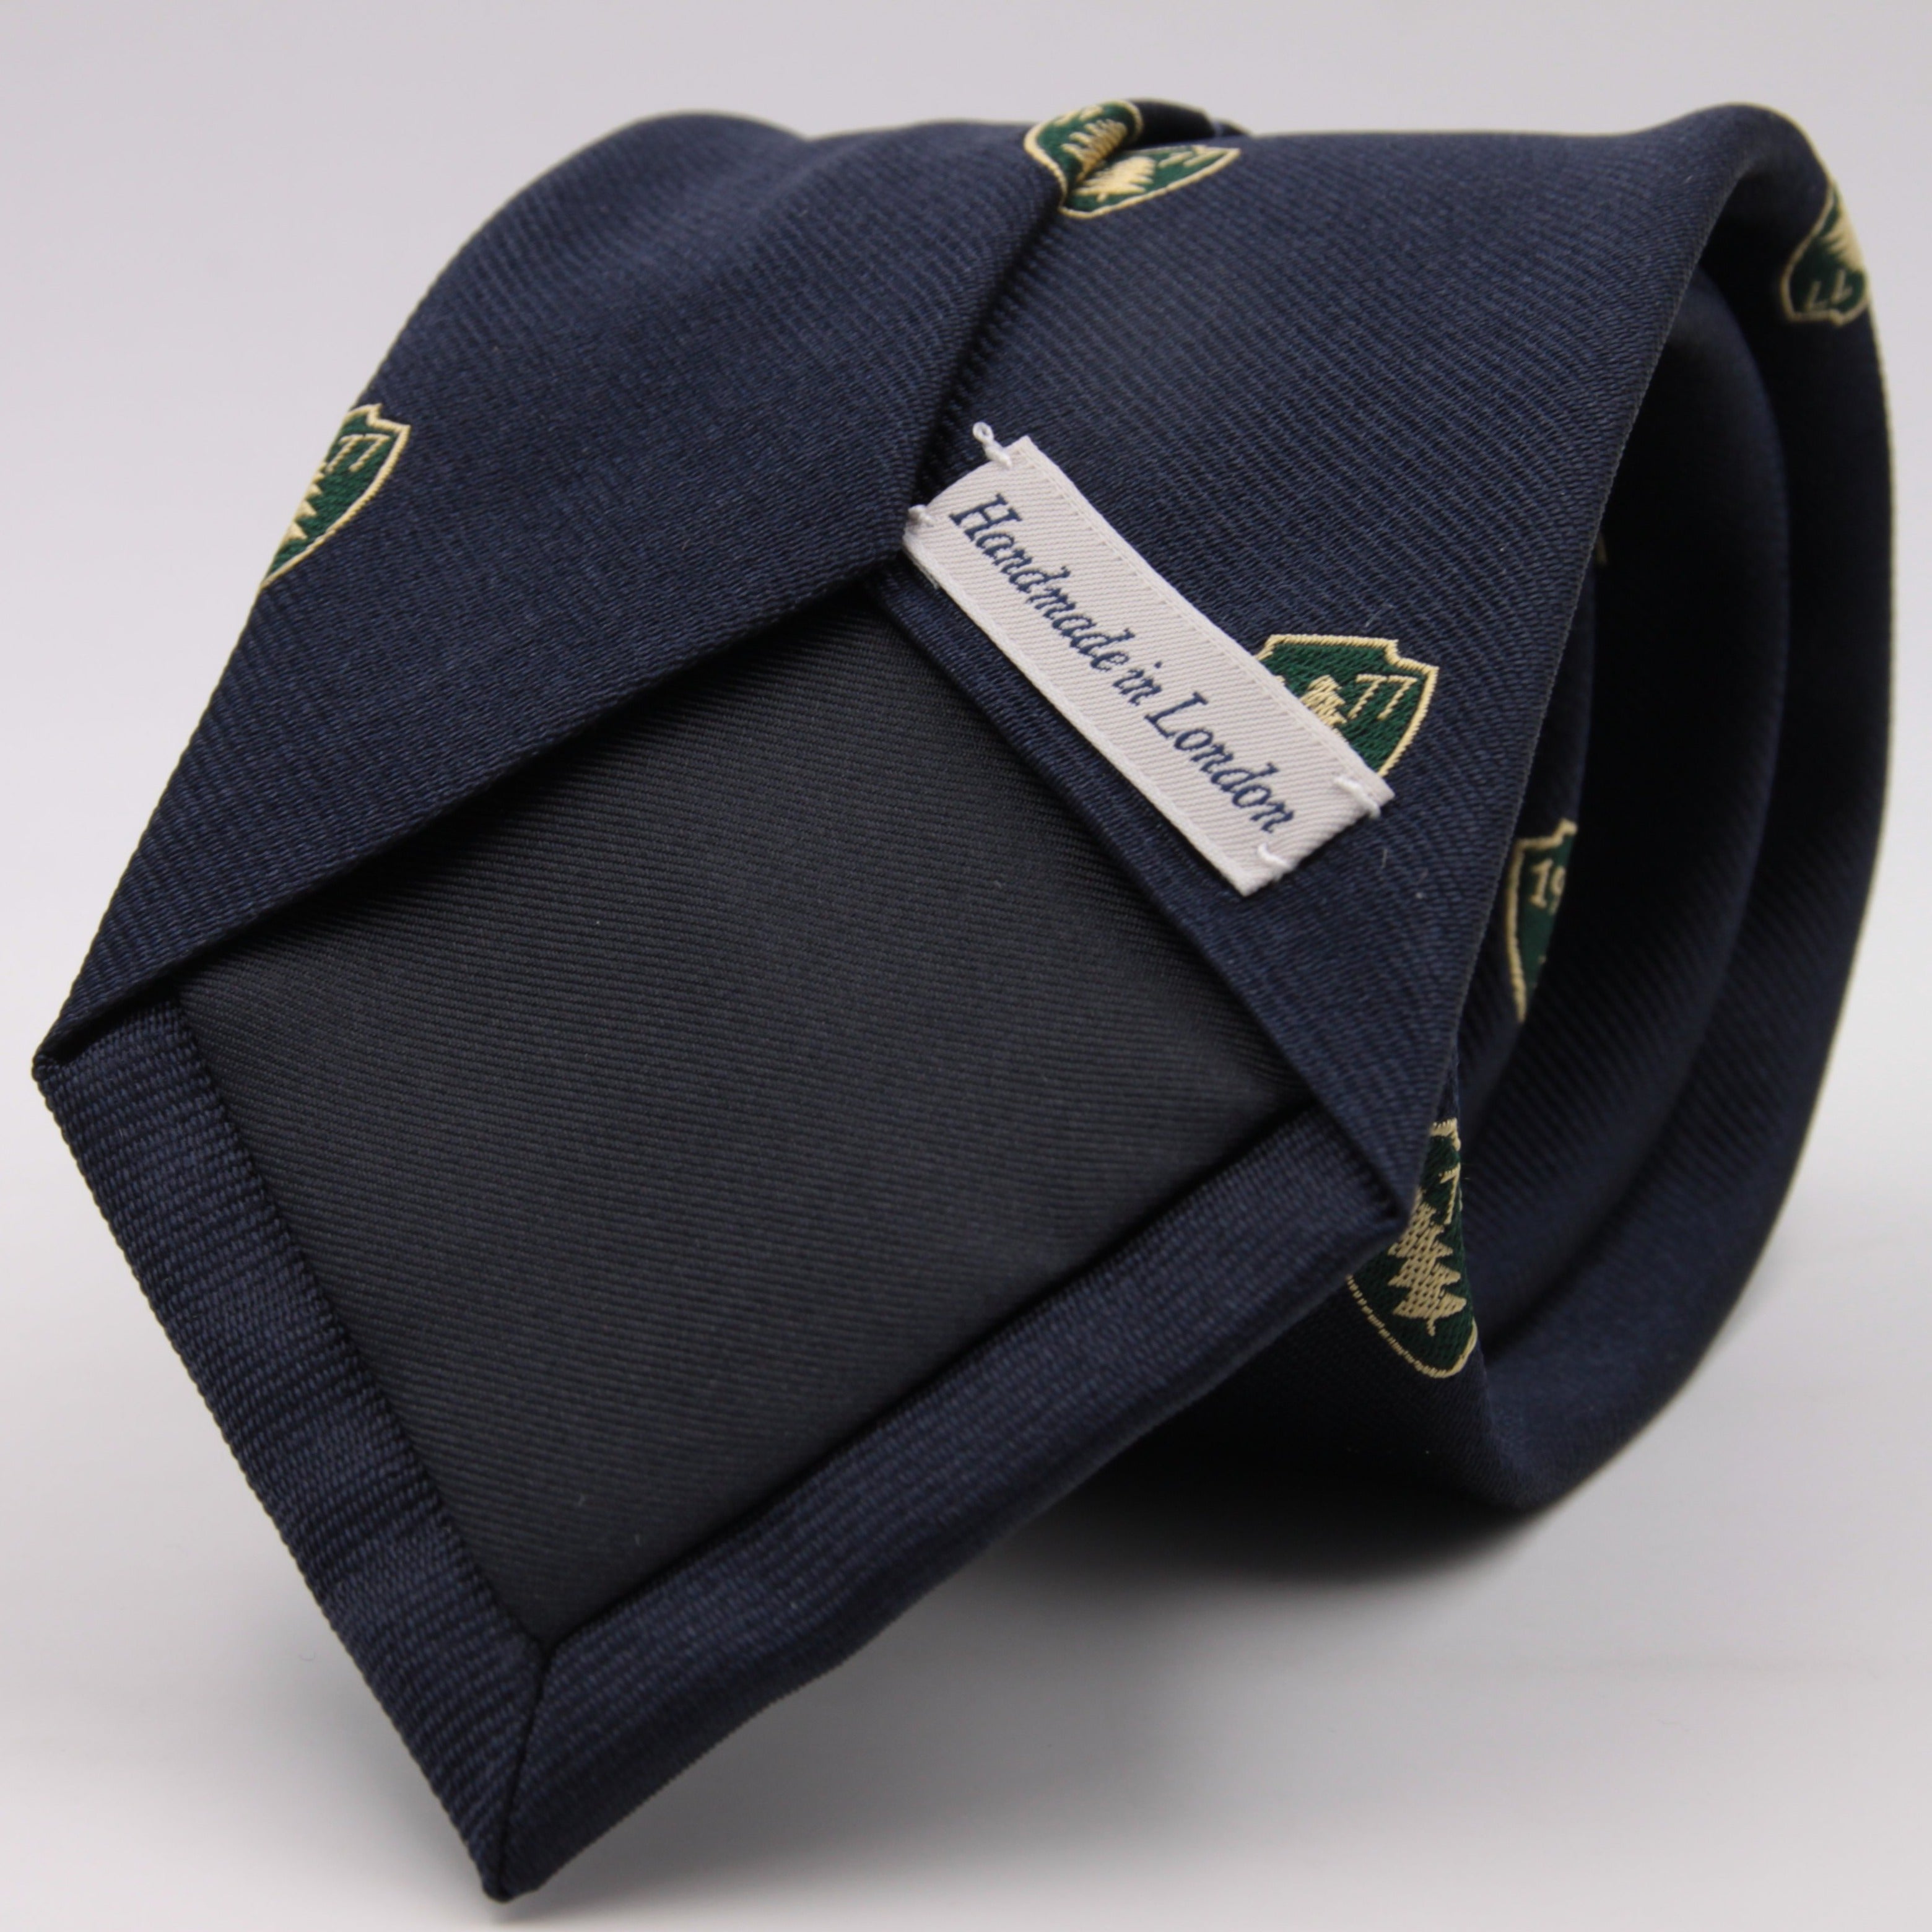 Drake's for Cruciani e Bella 100%  Woven Silk Tipped Blue, Green and Yellow Motif tie Handmade in London, England 8 cm x 150 cm #3652